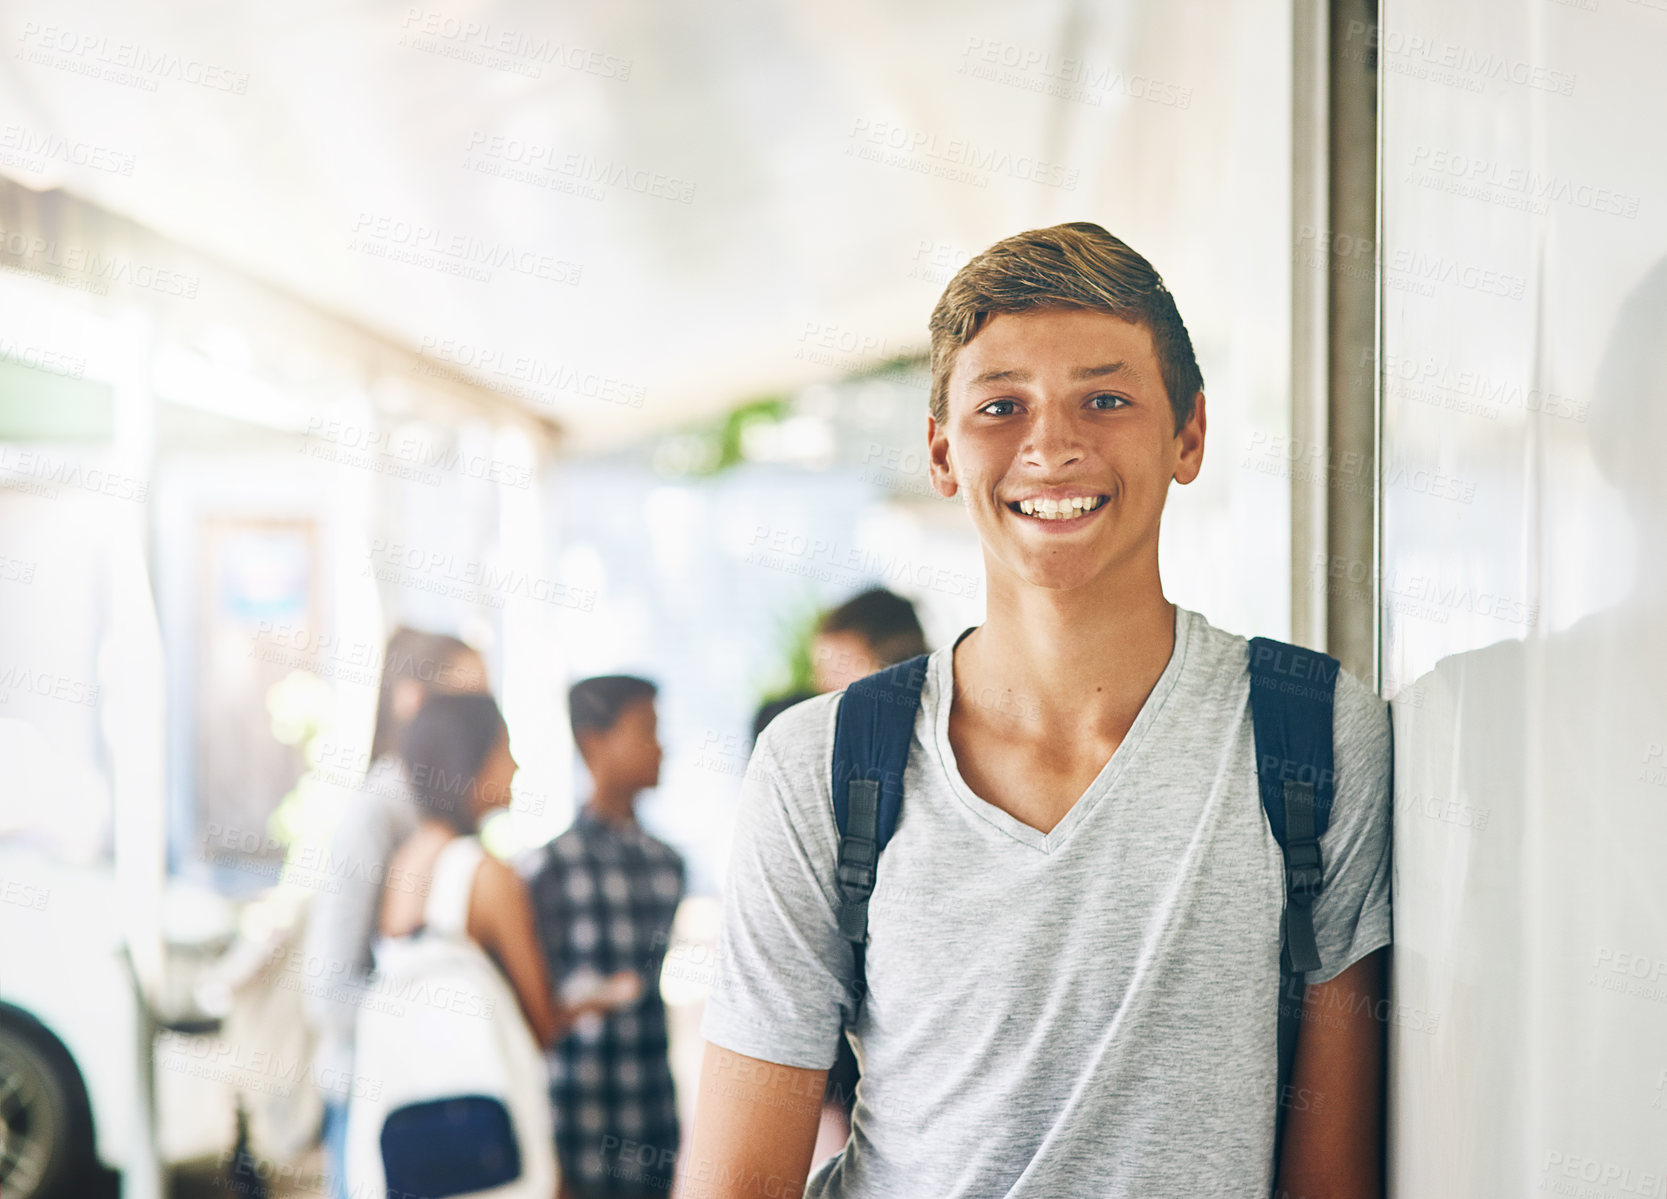 Buy stock photo Portrait of a happy schoolboy standing outside his classroom with classmates in the background